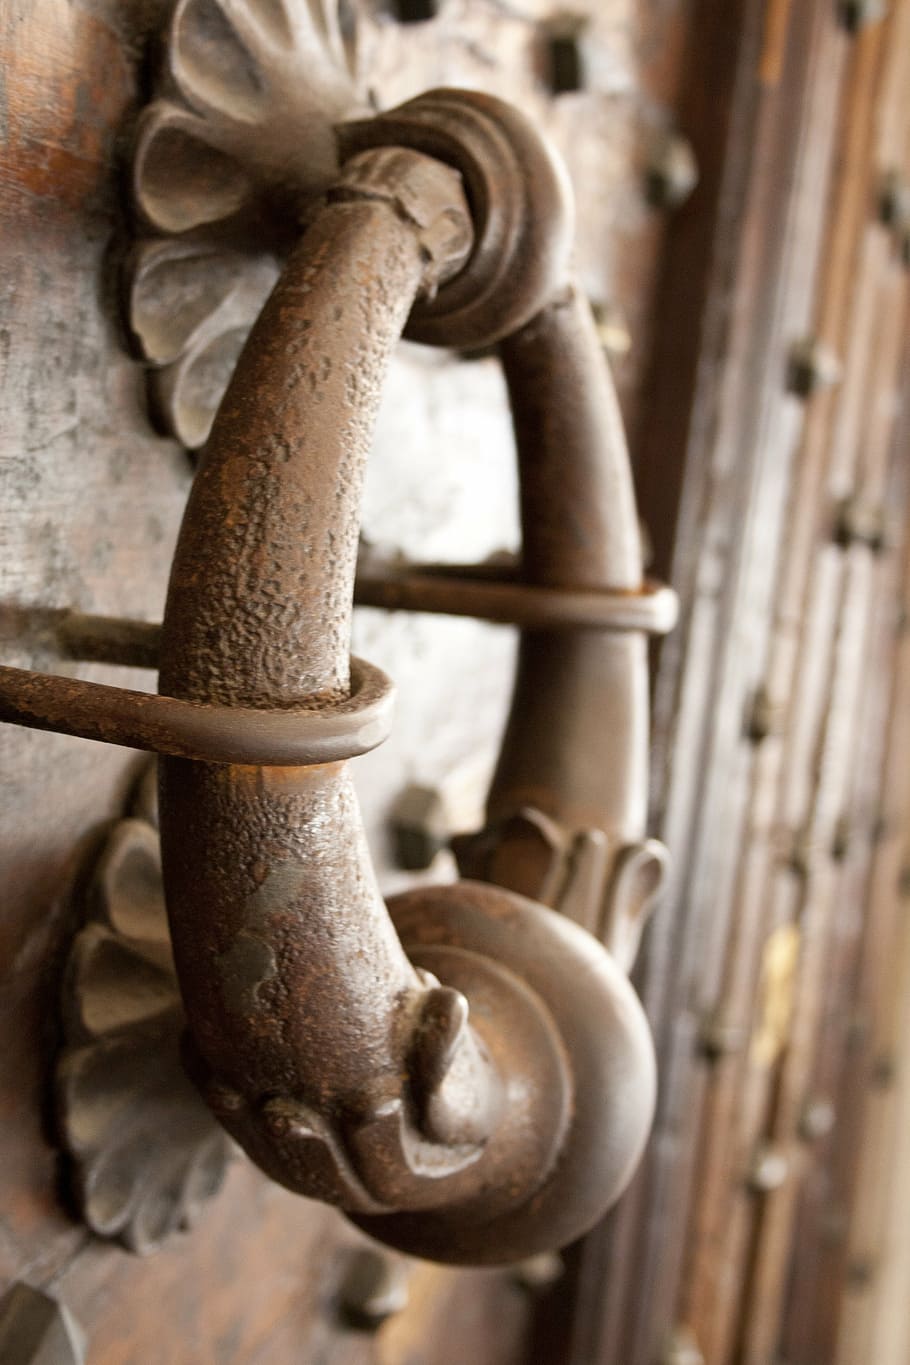 doorbell, door, bologna, old, close-up, metal, wood - material, focus on foreground, rusty, day